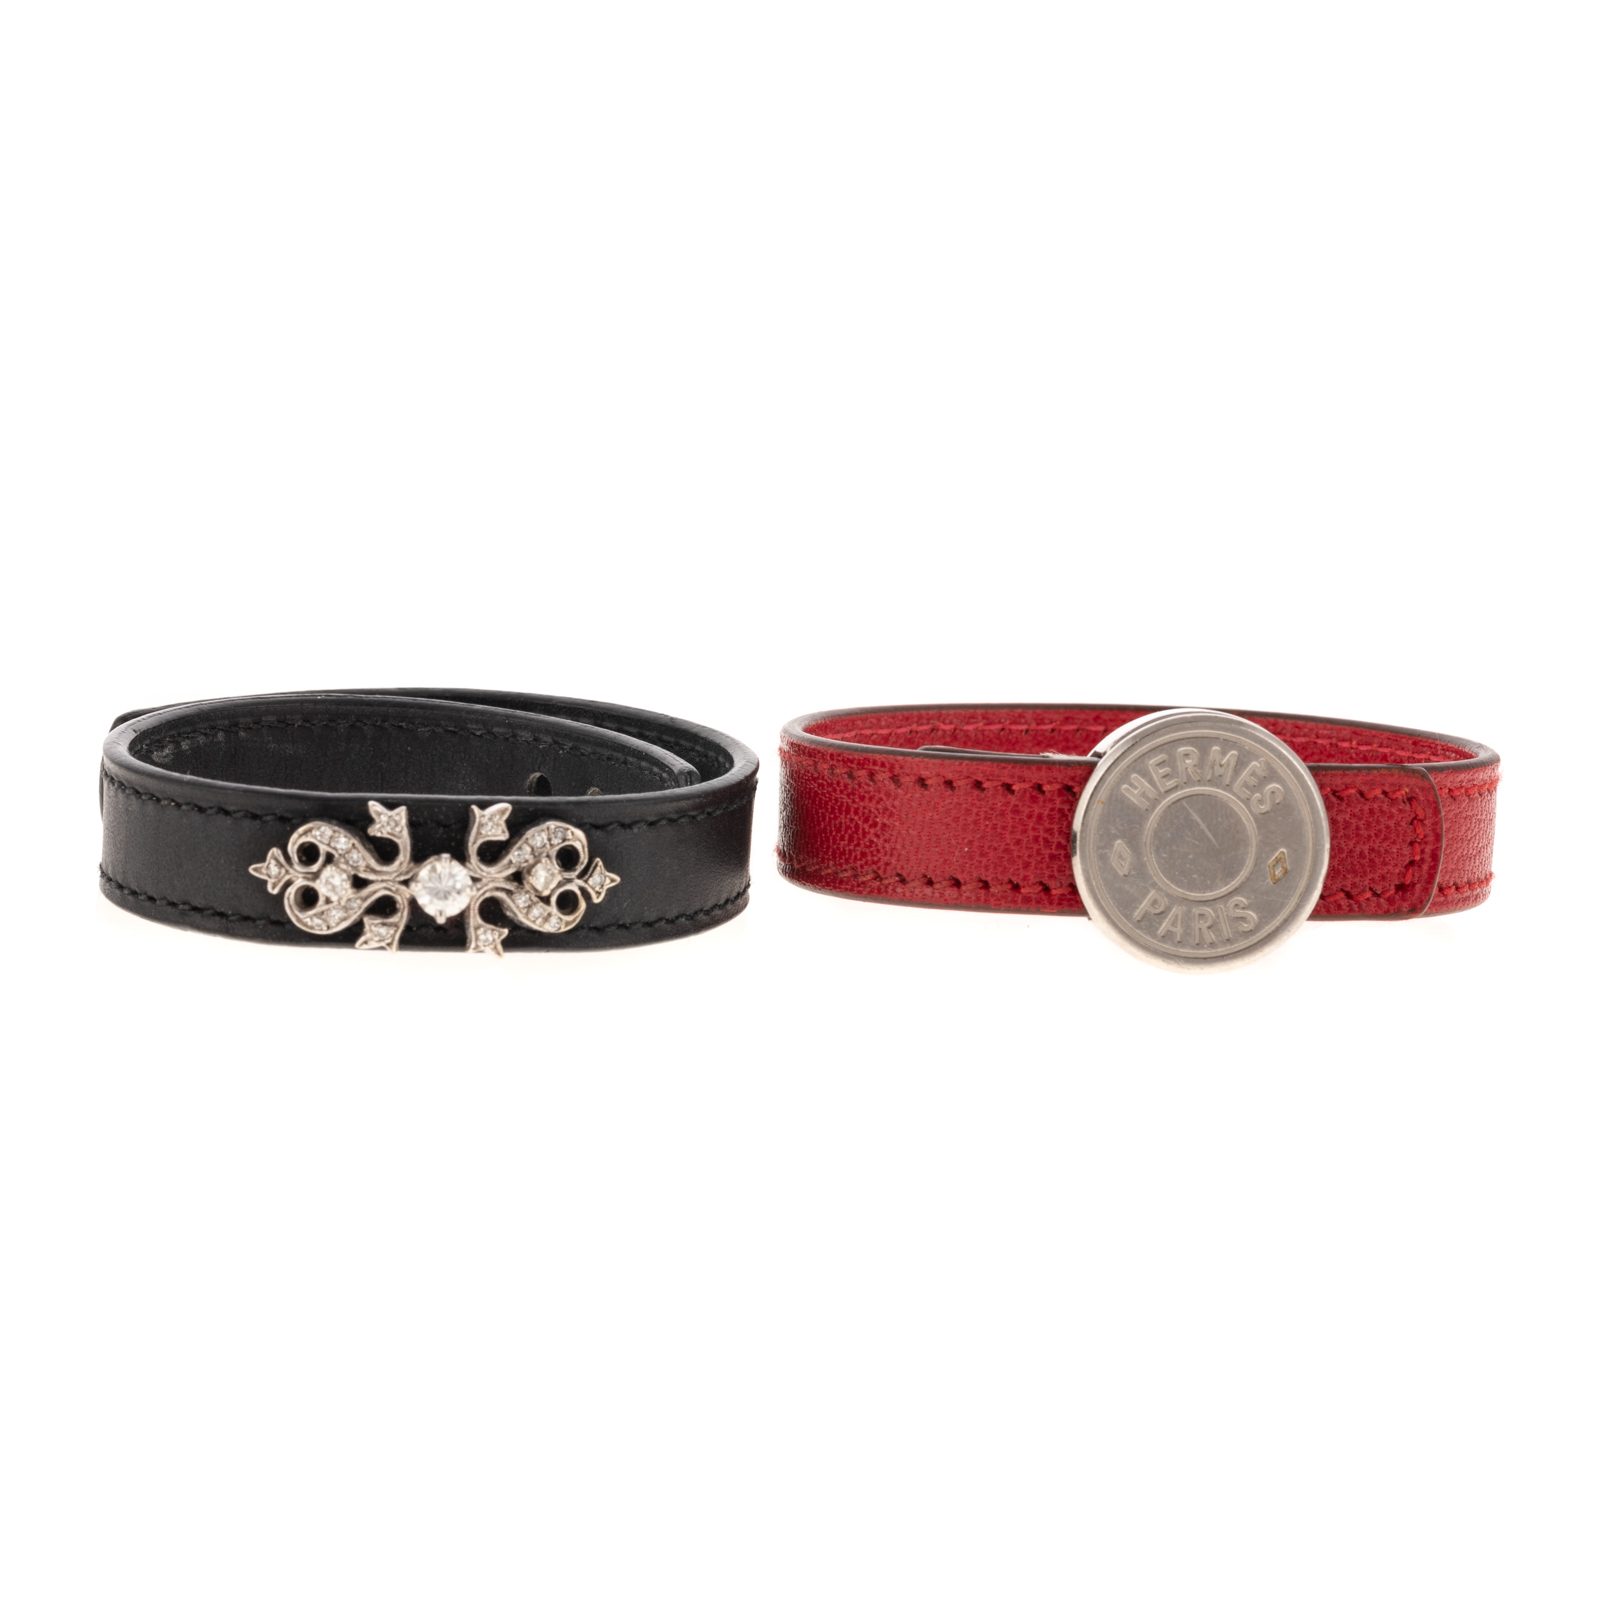 AN HERMES WRAP BRACELET A red leather 3cb576